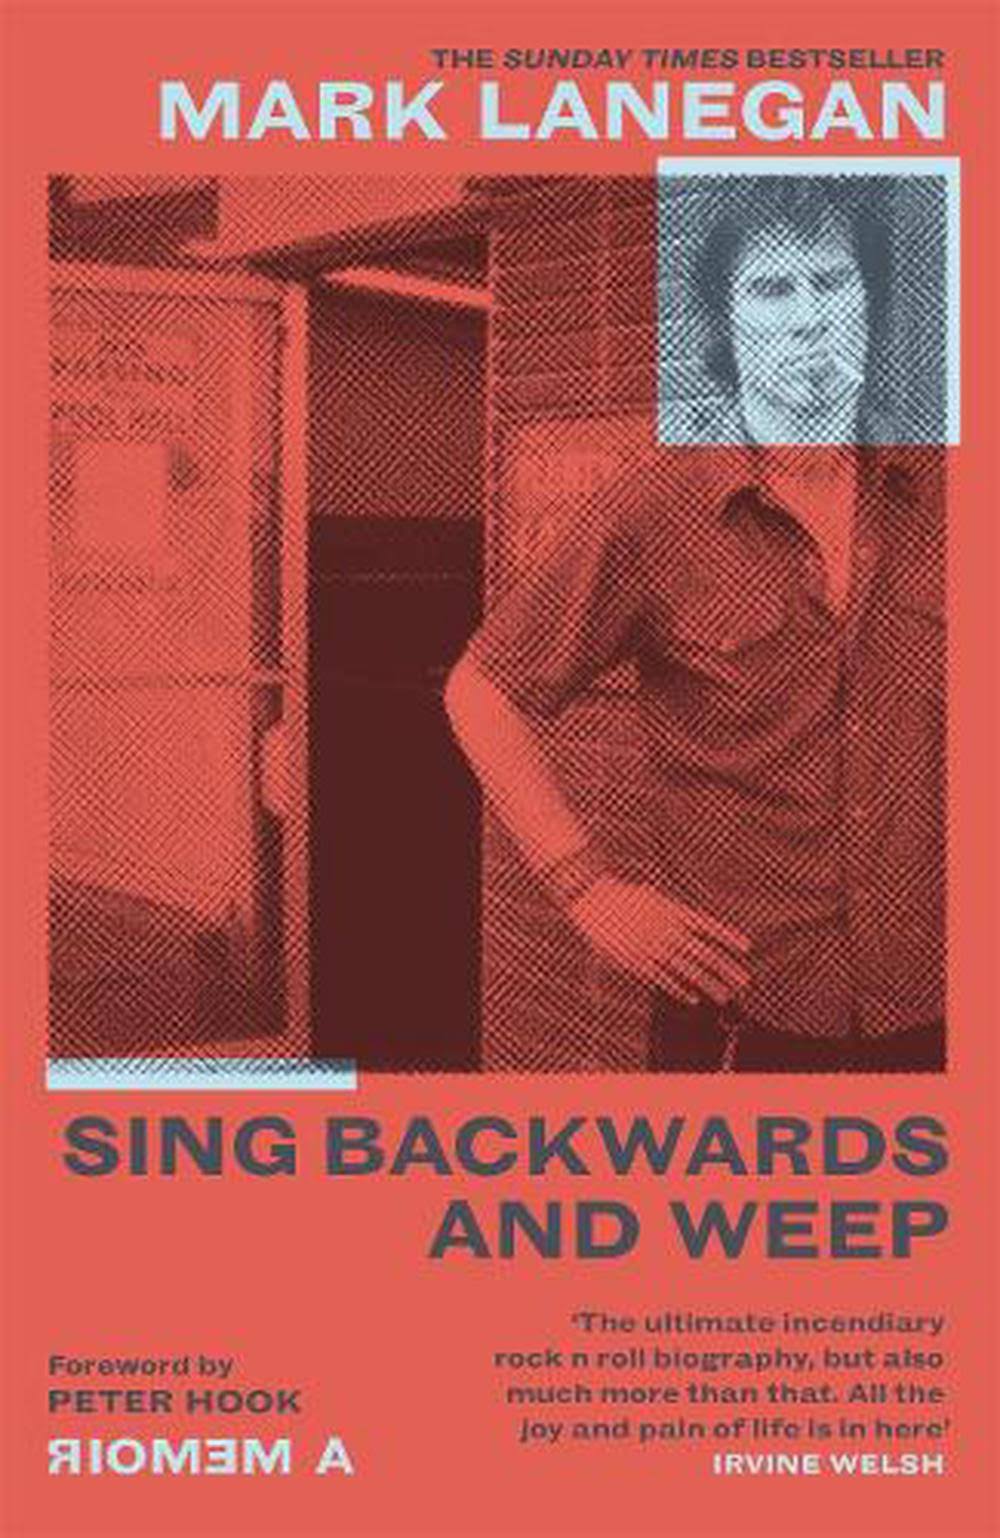 Sing Backwards and Weep - The Sunday Times Bestseller